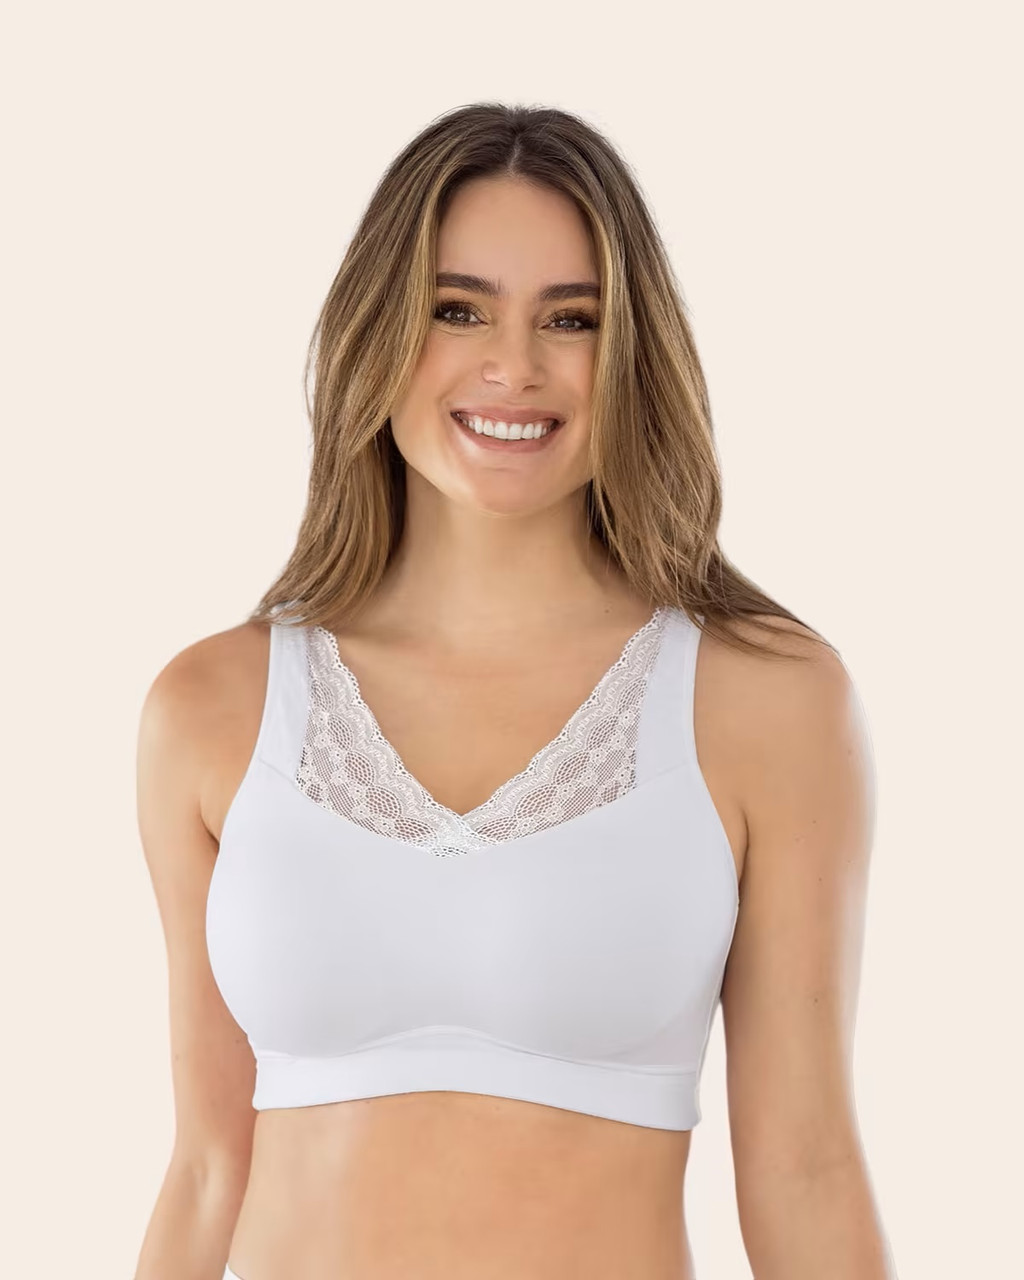 Cotton Plain Mastectomy Pocket Bra, For Inner Wear, Size: 32 at Rs